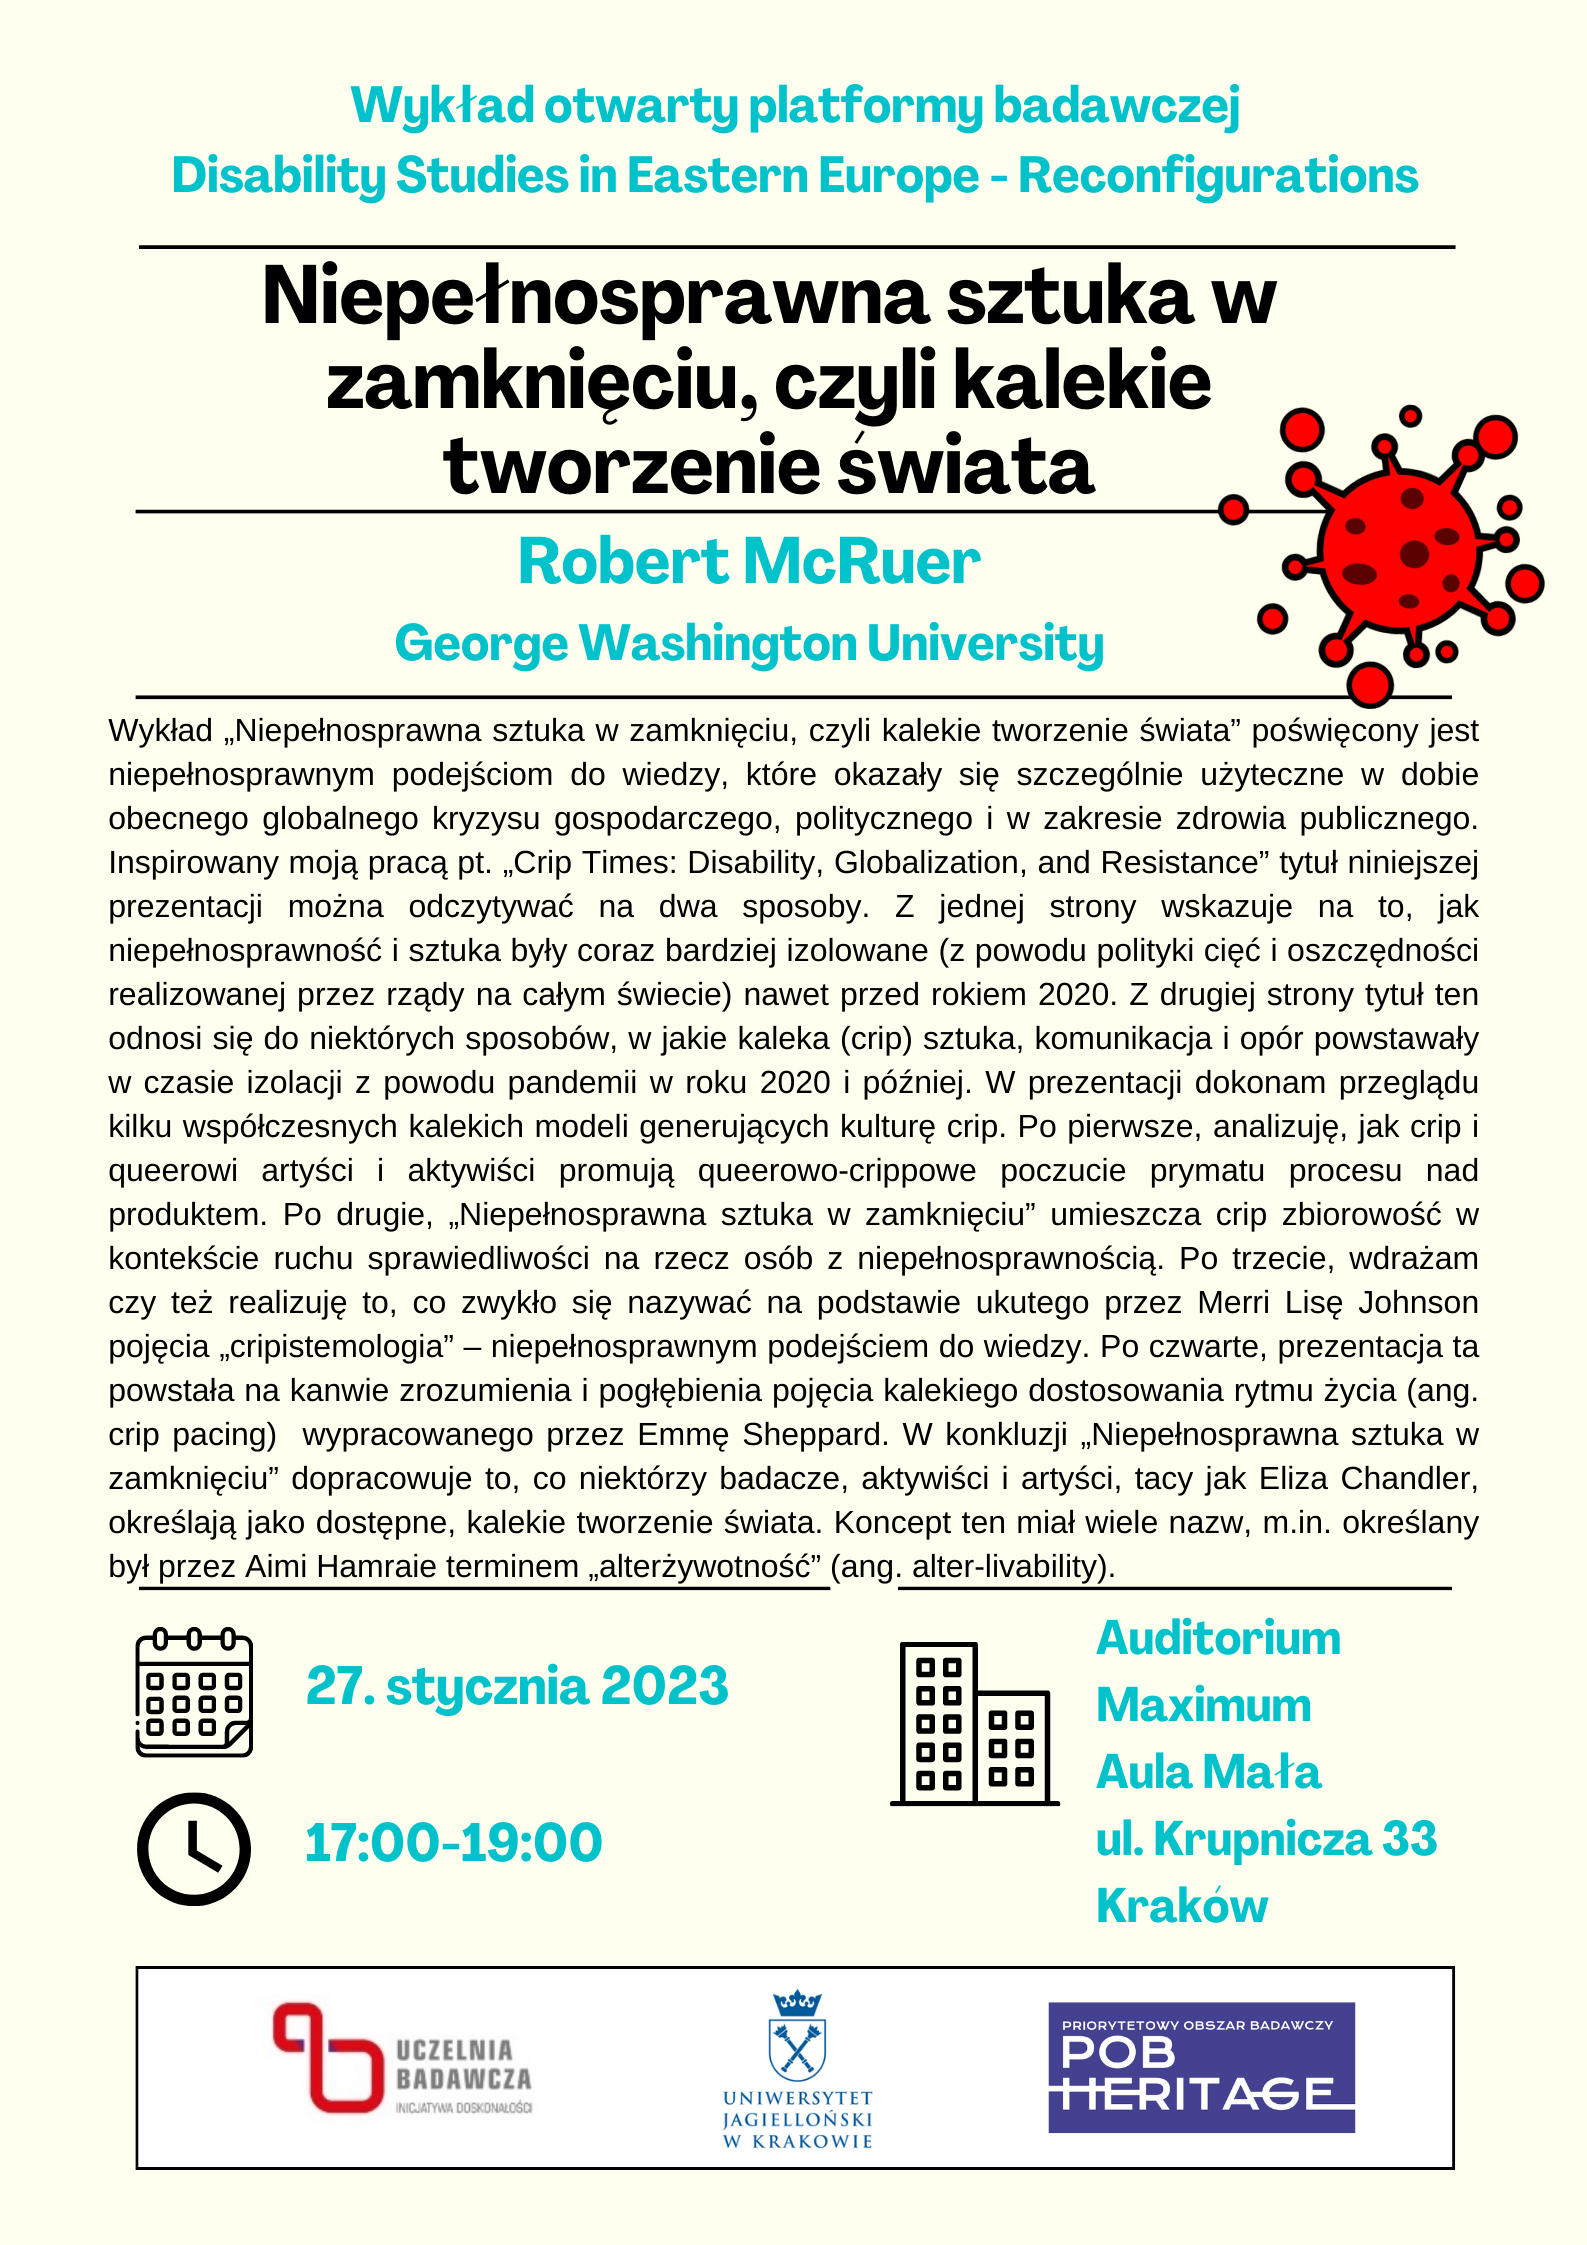 poster of the event in Polish translation - text informing about the lecture